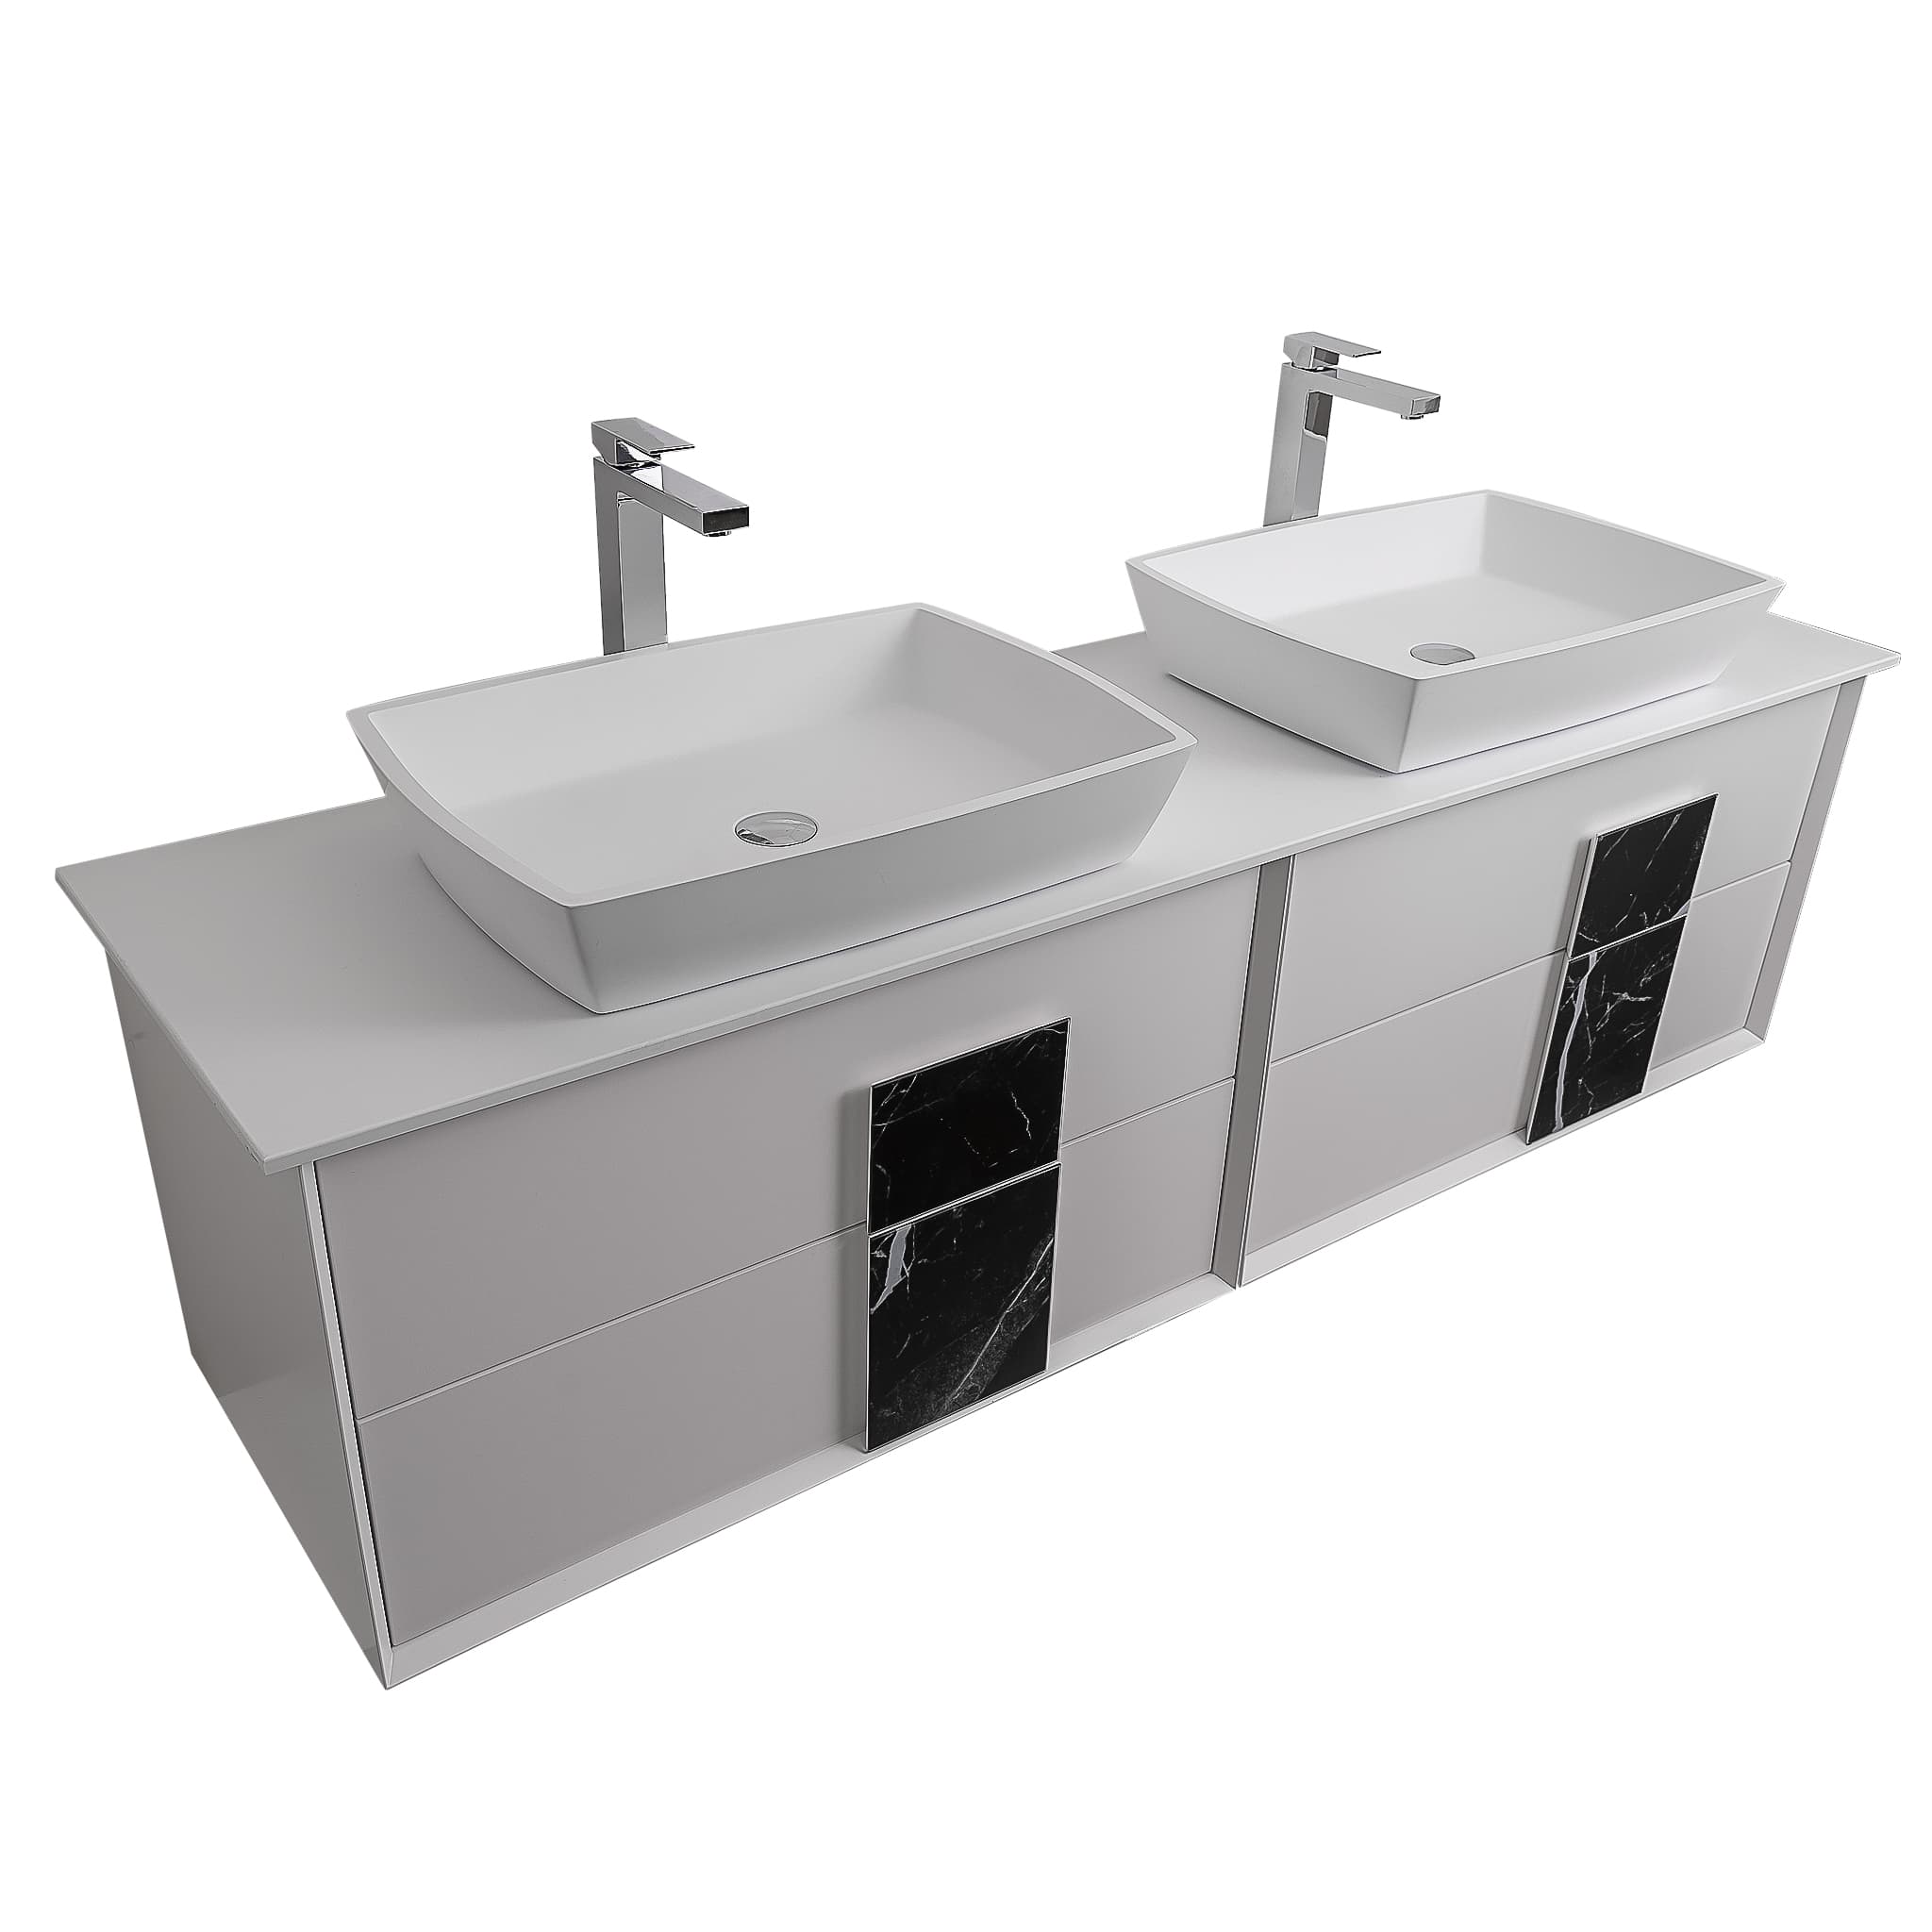 Piazza 63 Matte White With Black Marble Handle Cabinet, Solid Surface Flat White Counter and Two Square Solid Surface White Basin 1316, Wall Mounted Modern Vanity Set